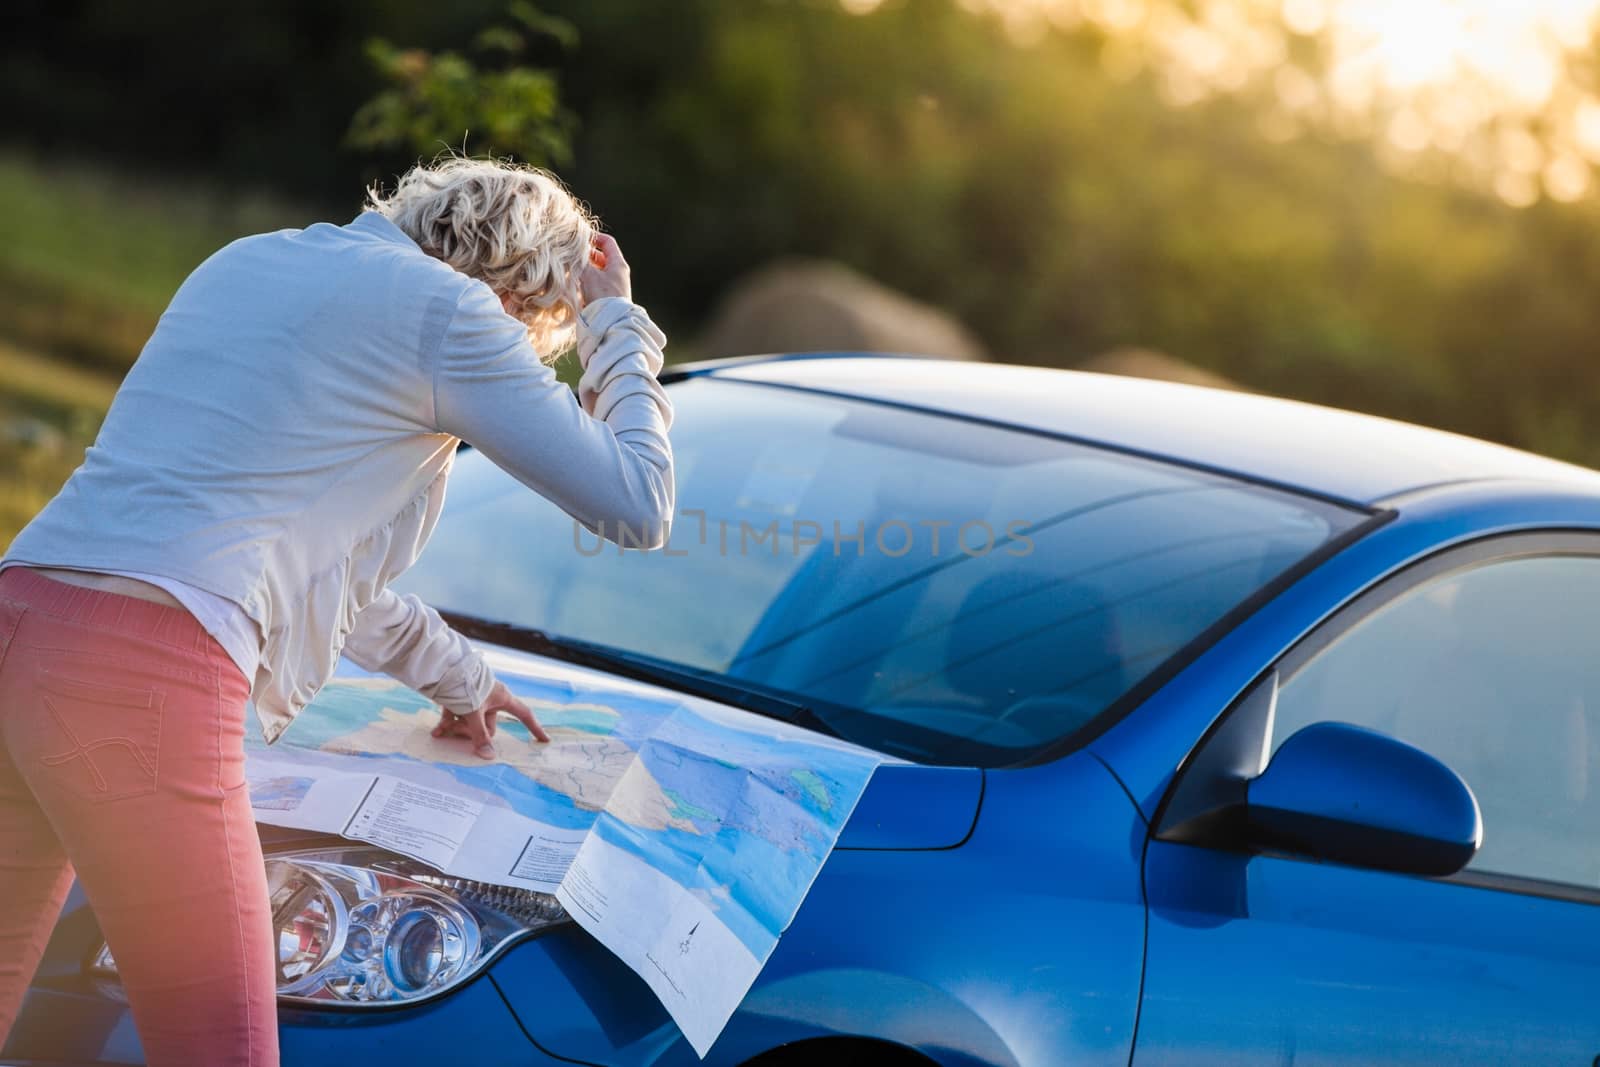 Lost Woman on a Rural Scene Looking at a Map